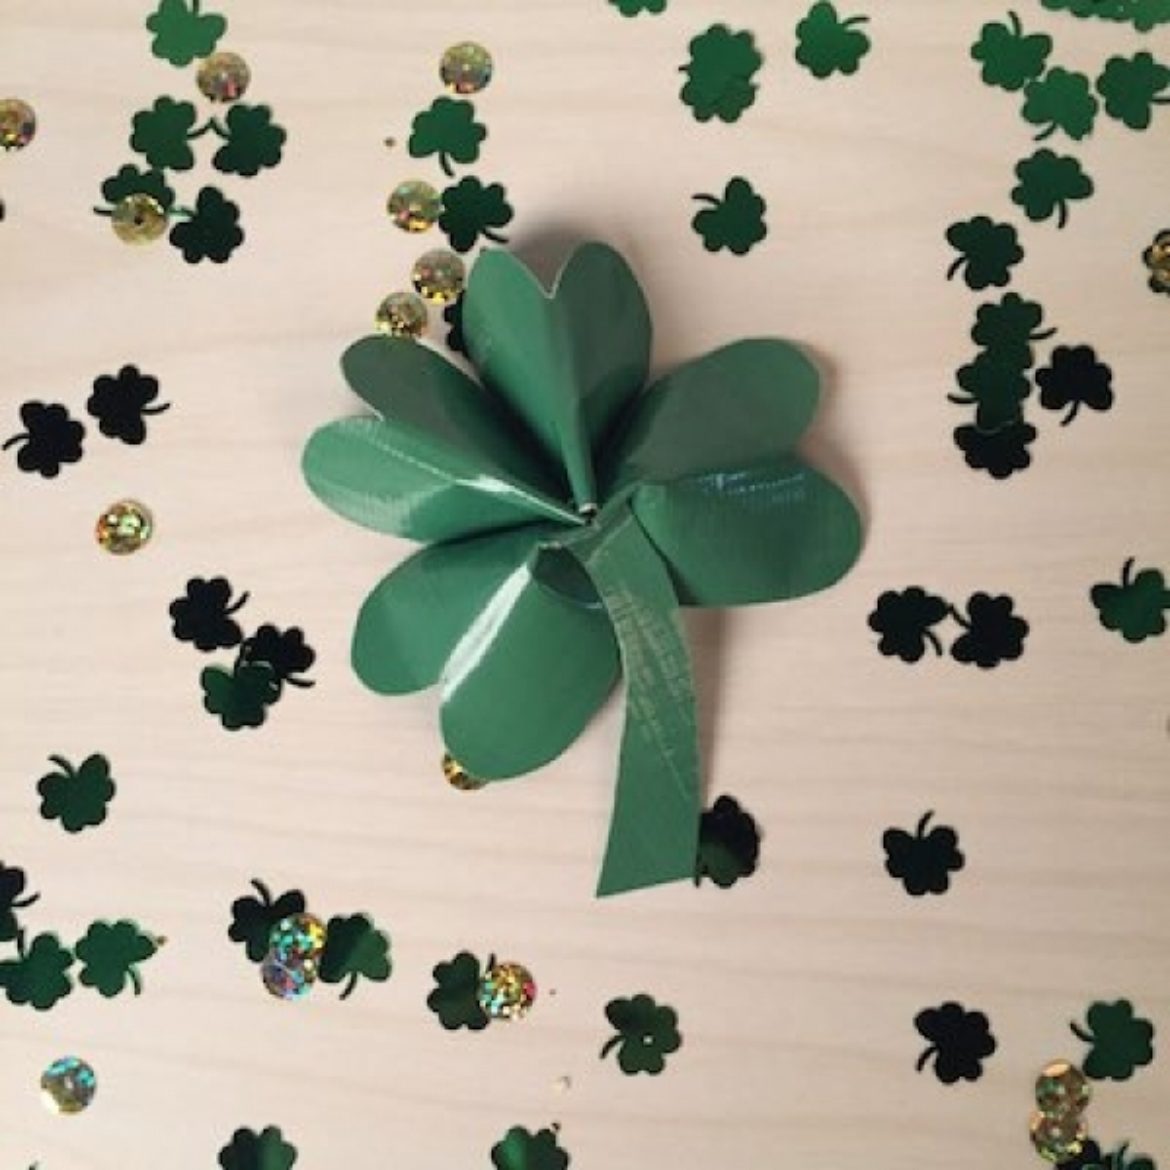 Completed Duck Tape Four-Leaf Clover  surrounded by confetti